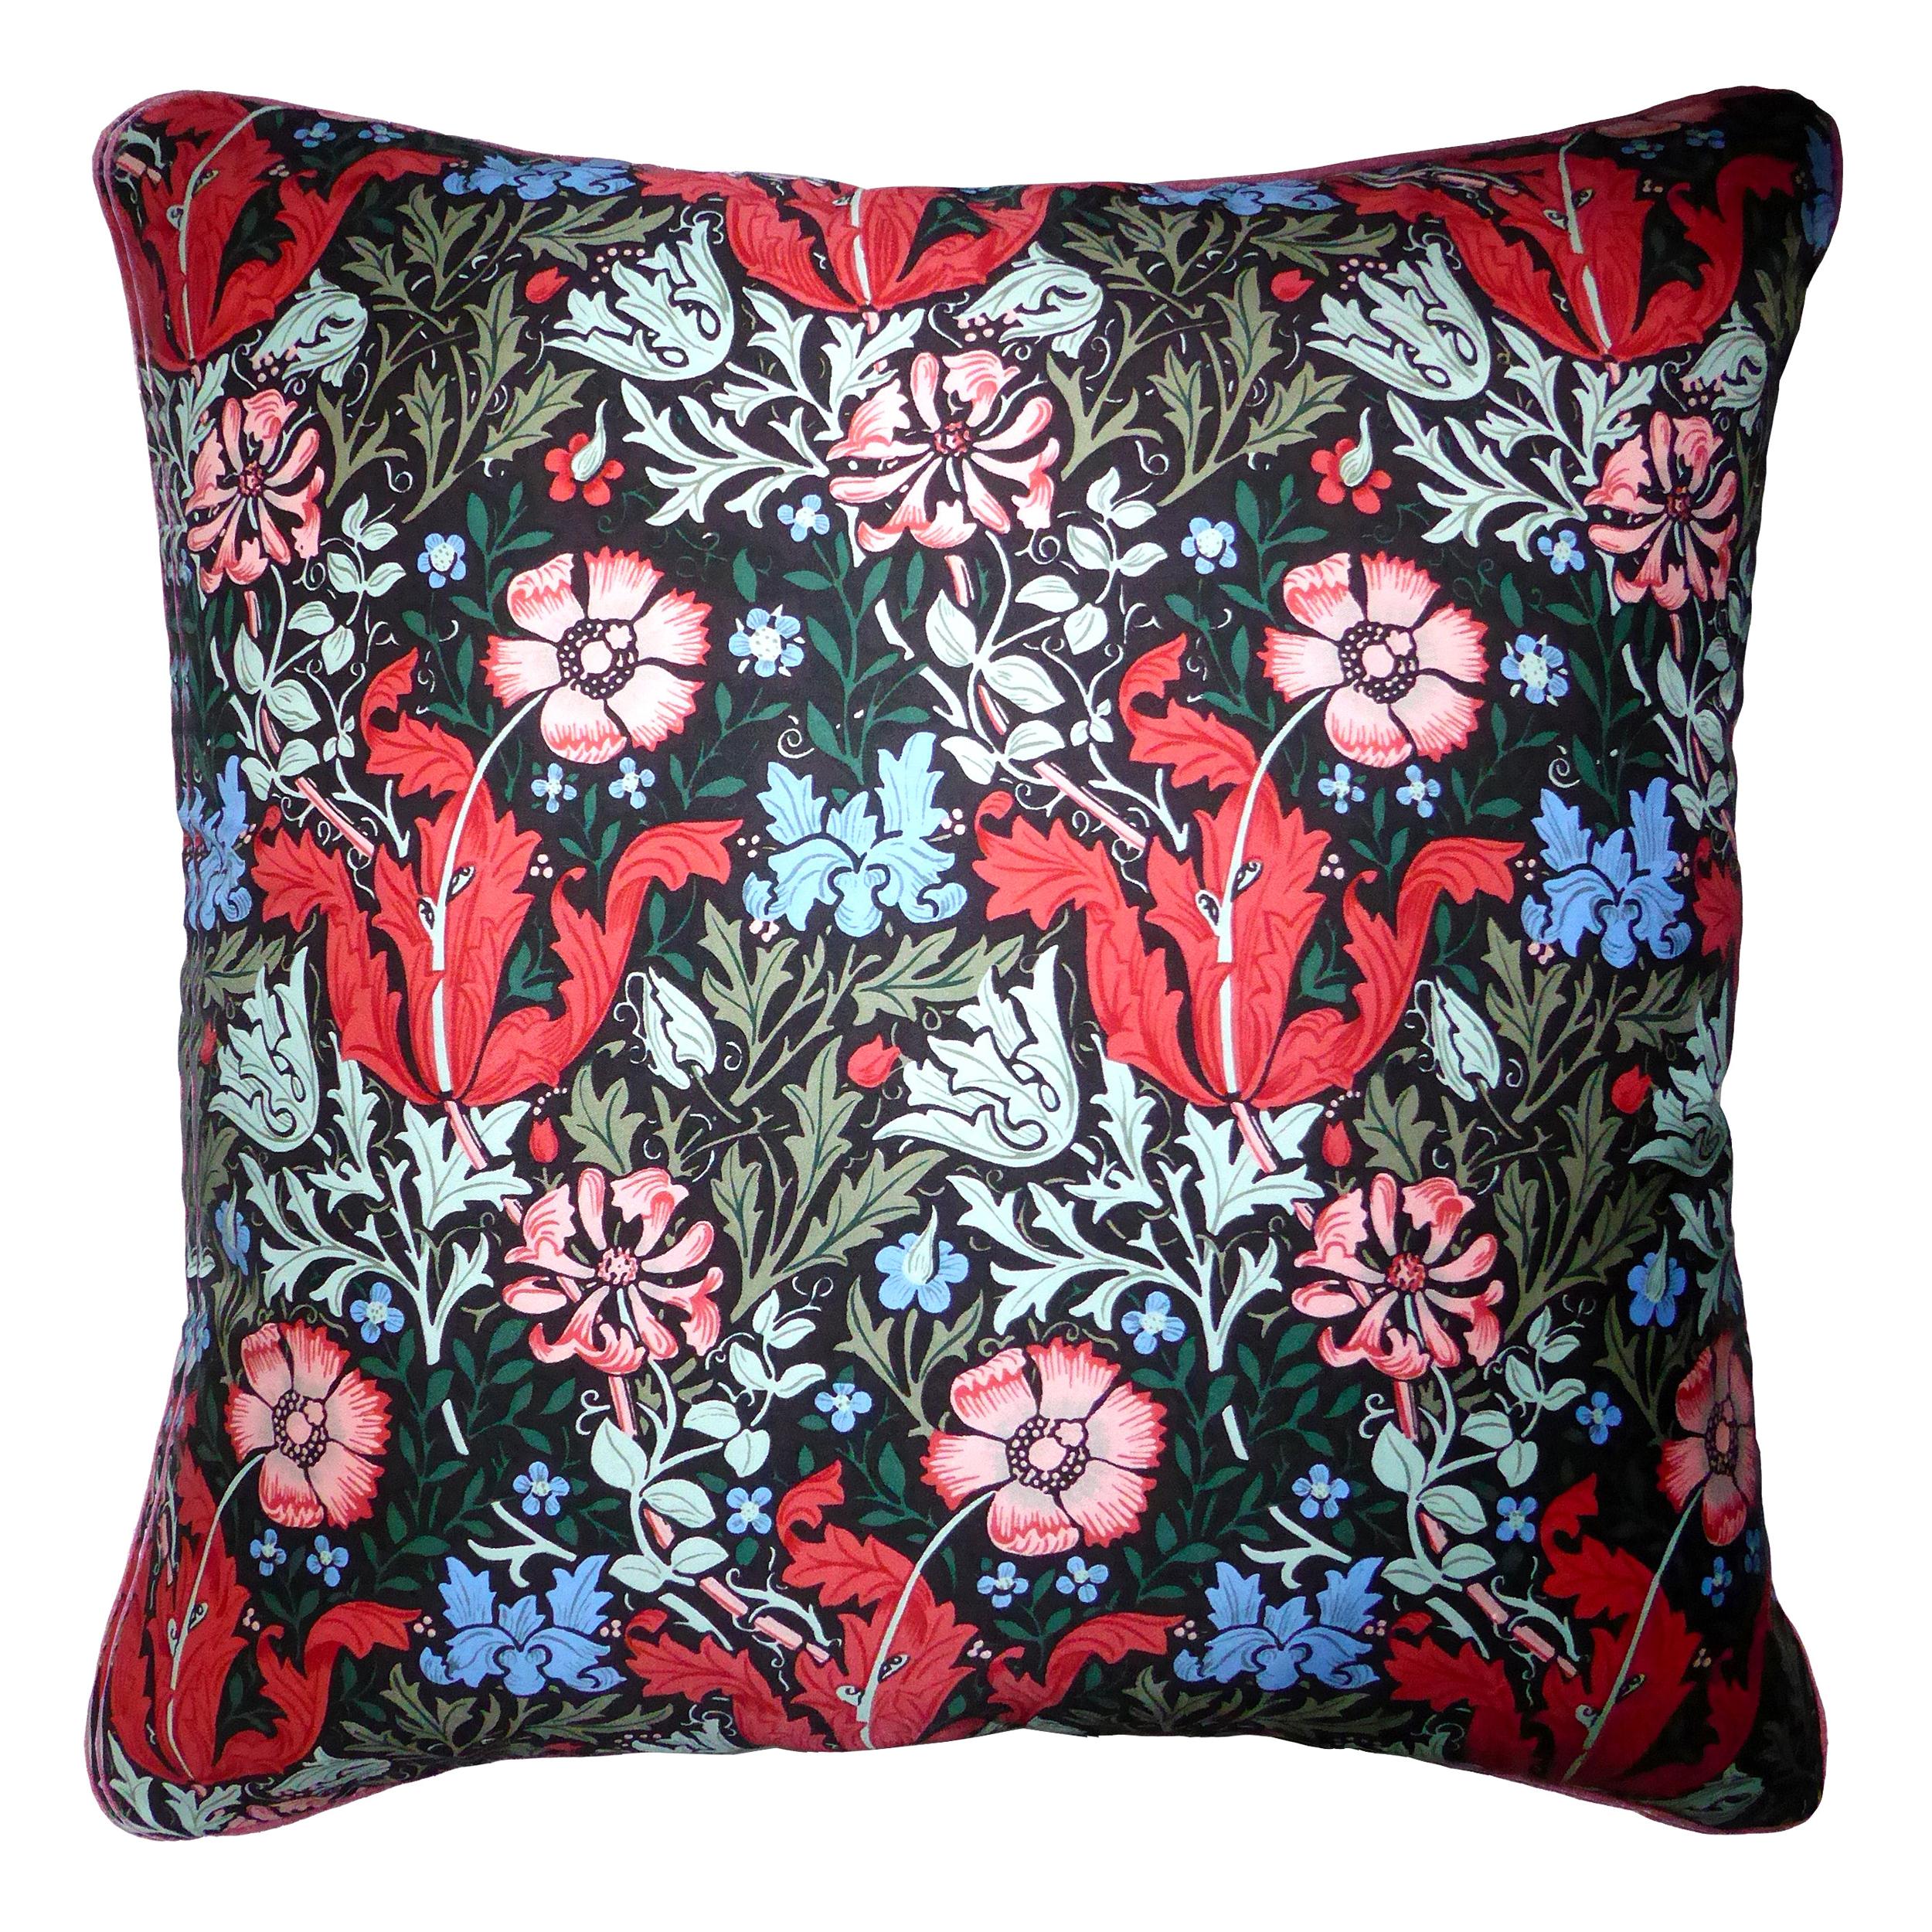 ‘Vintage Cushions’ Luxury Silk Bespoke-Made Pillow ‘Compton', Made in London